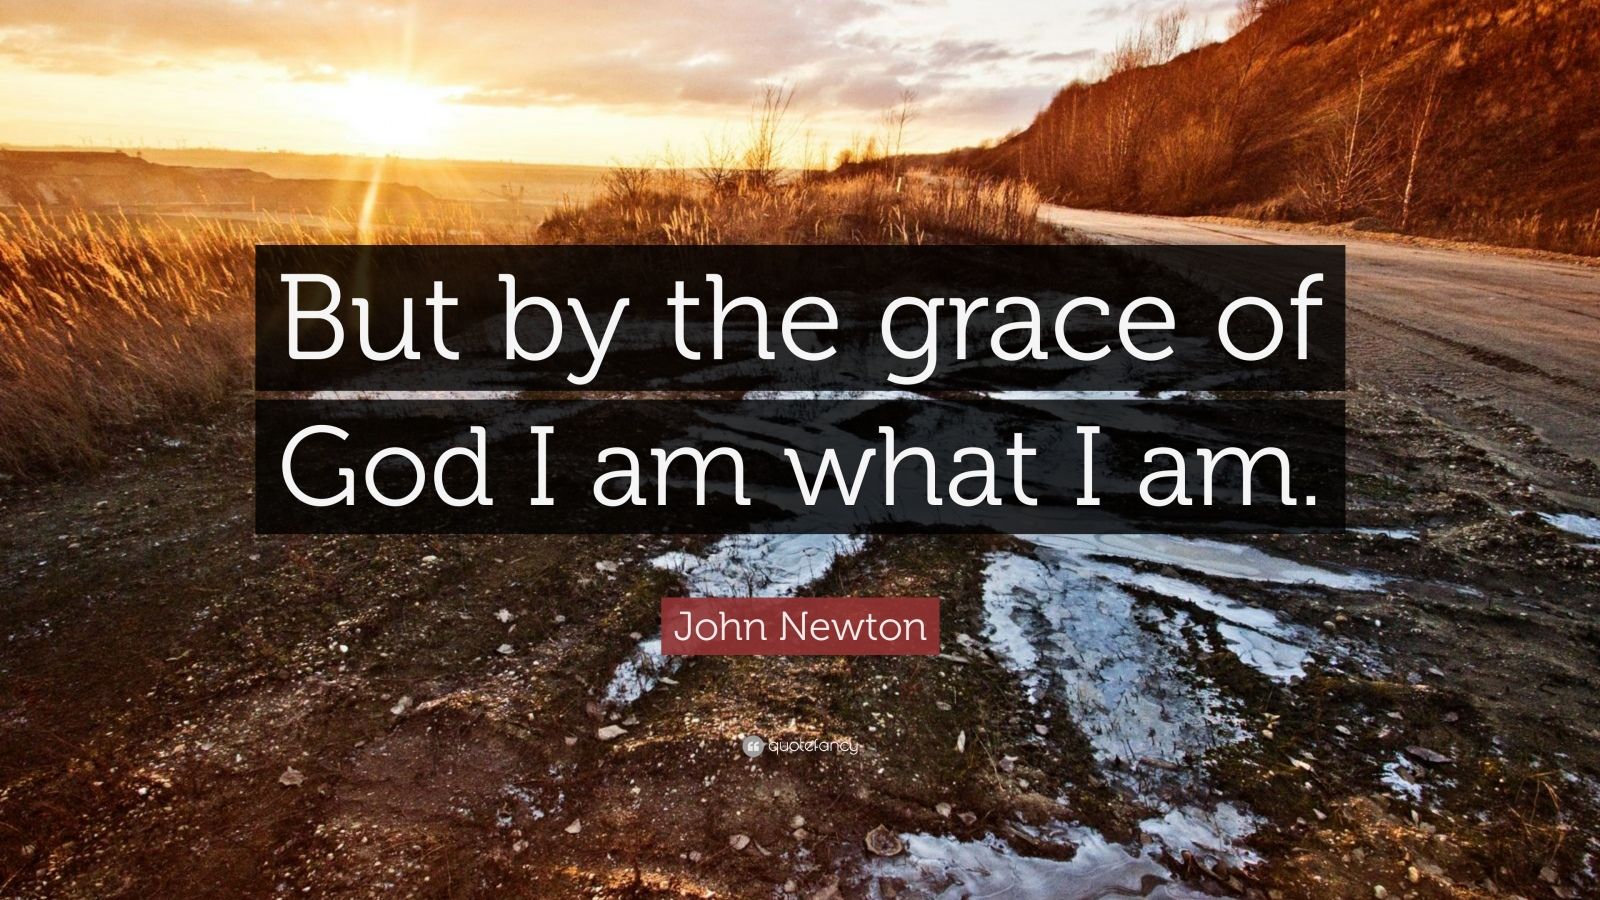 John Newton Quote: “But by the grace of God I am what I am.” (9